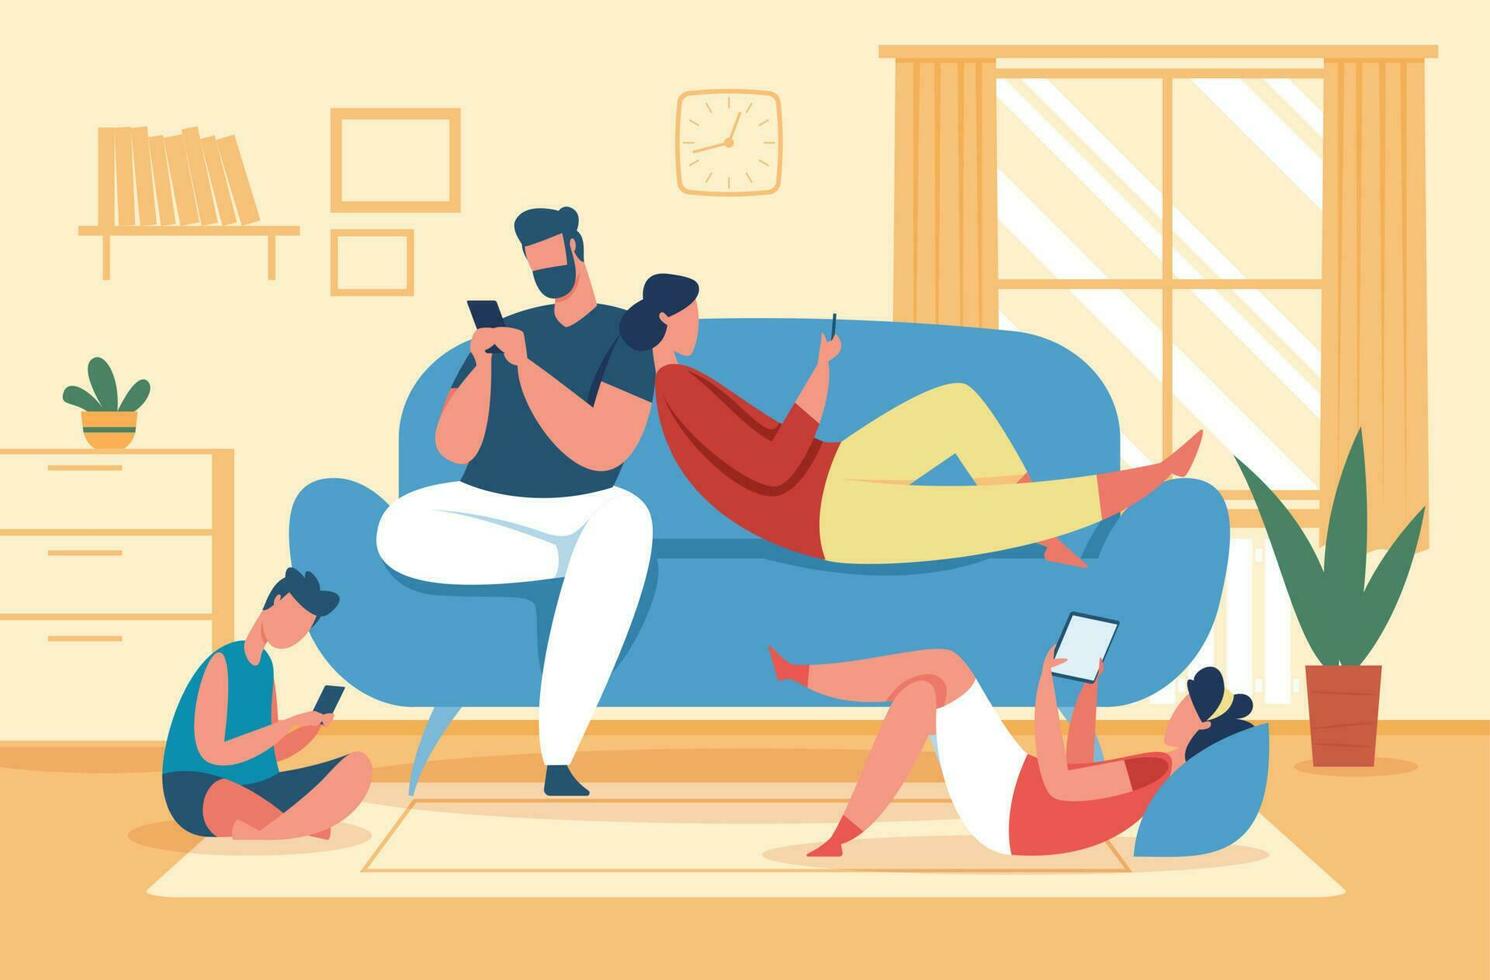 Family using smartphones and tablets, parents and kids with phones. Social media addiction, children use gadgets at home vector illustration